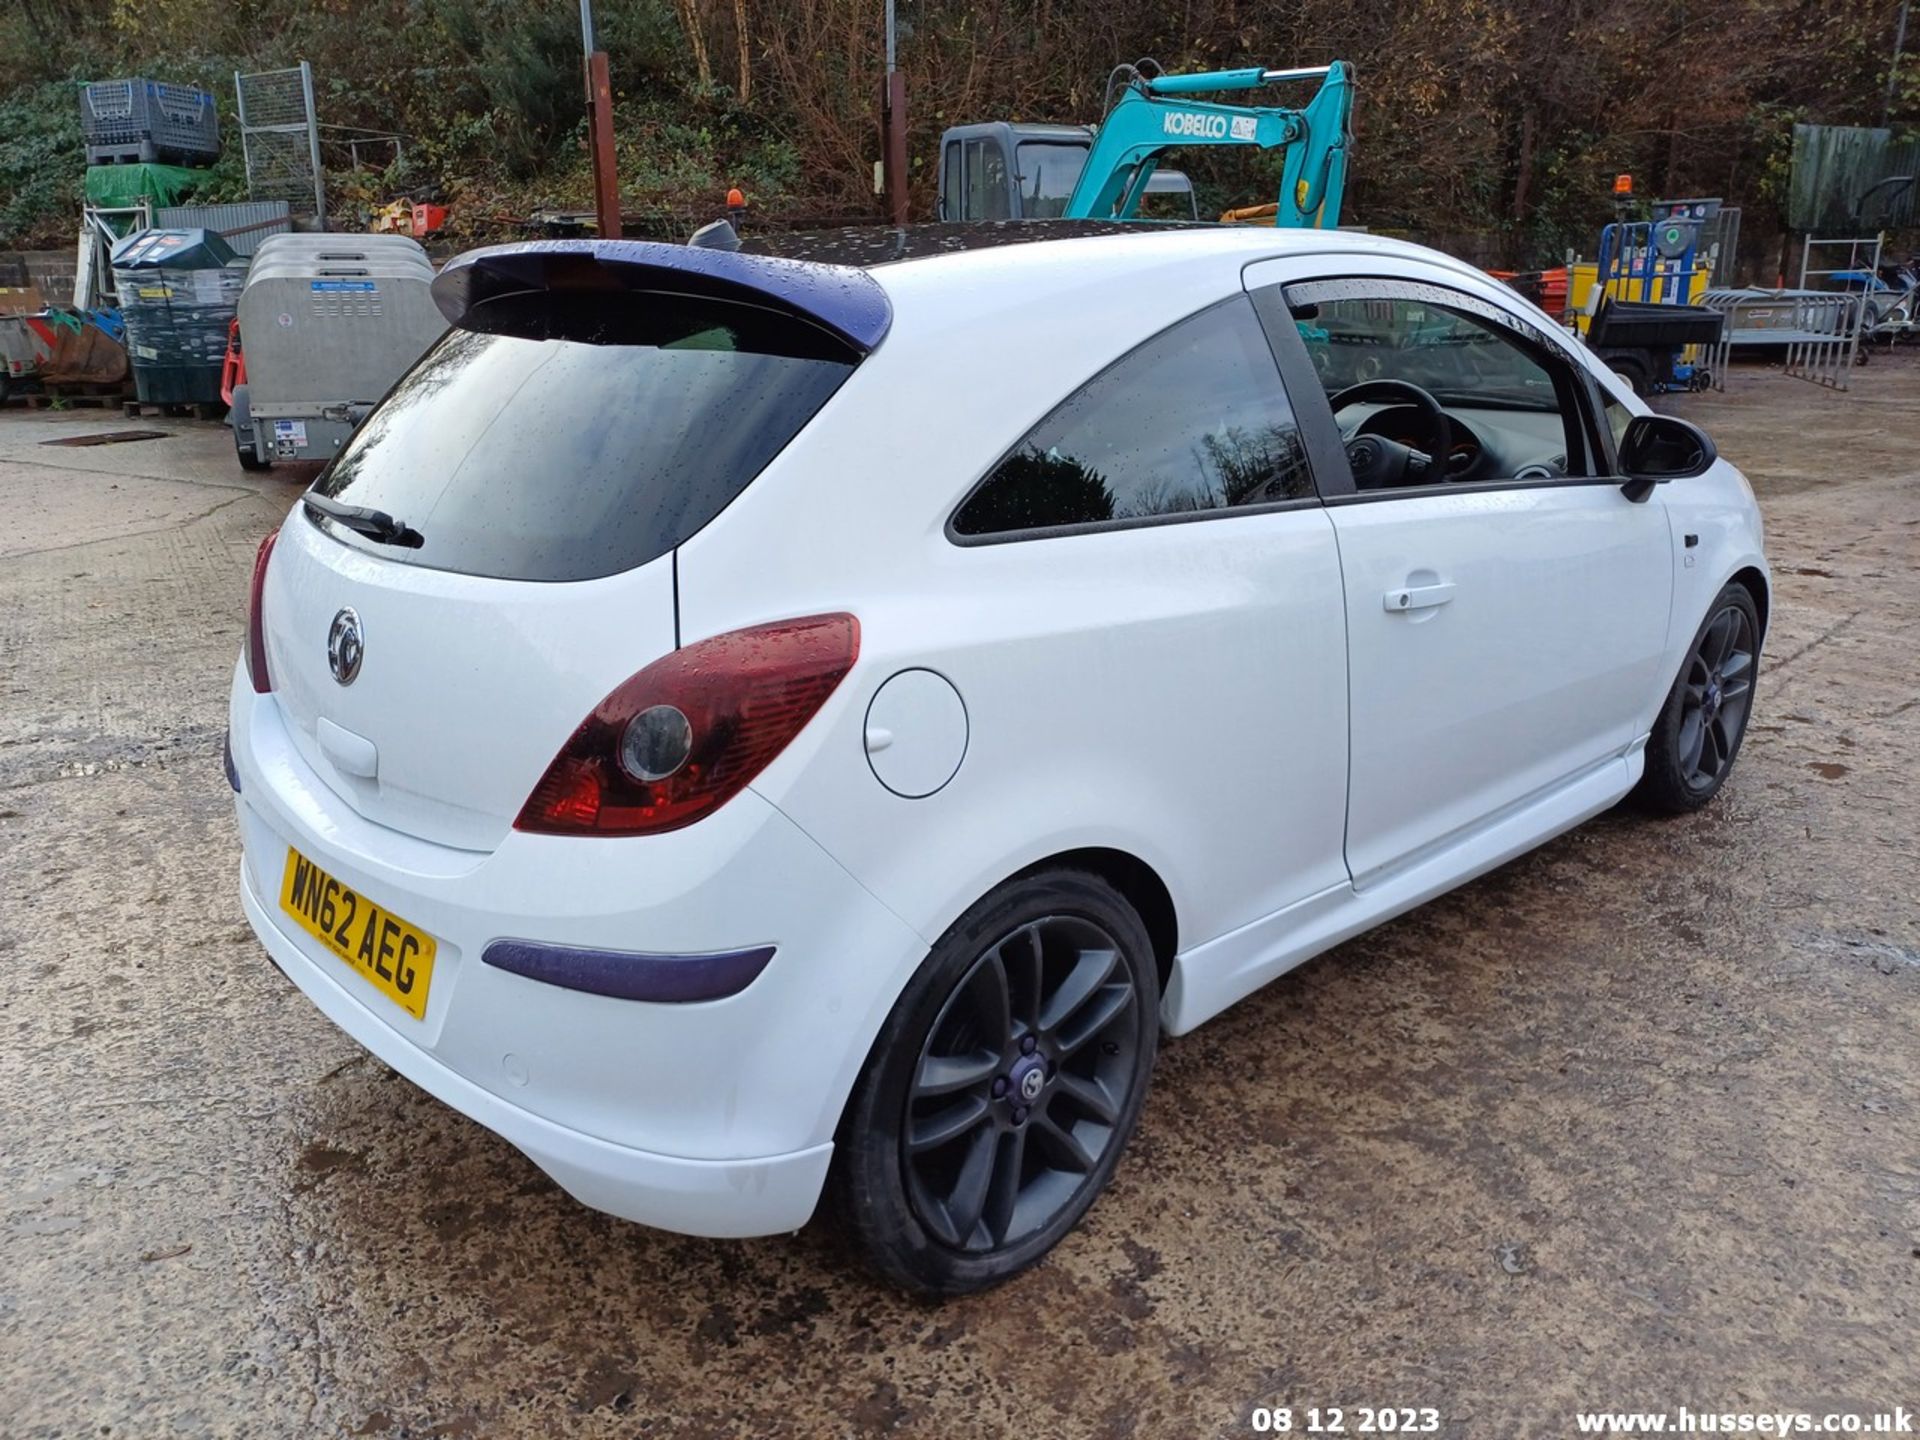 12/62 VAUXHALL CORSA LIMITED EDITION - 1229cc 3dr Hatchback (White, 58k) - Image 21 of 34